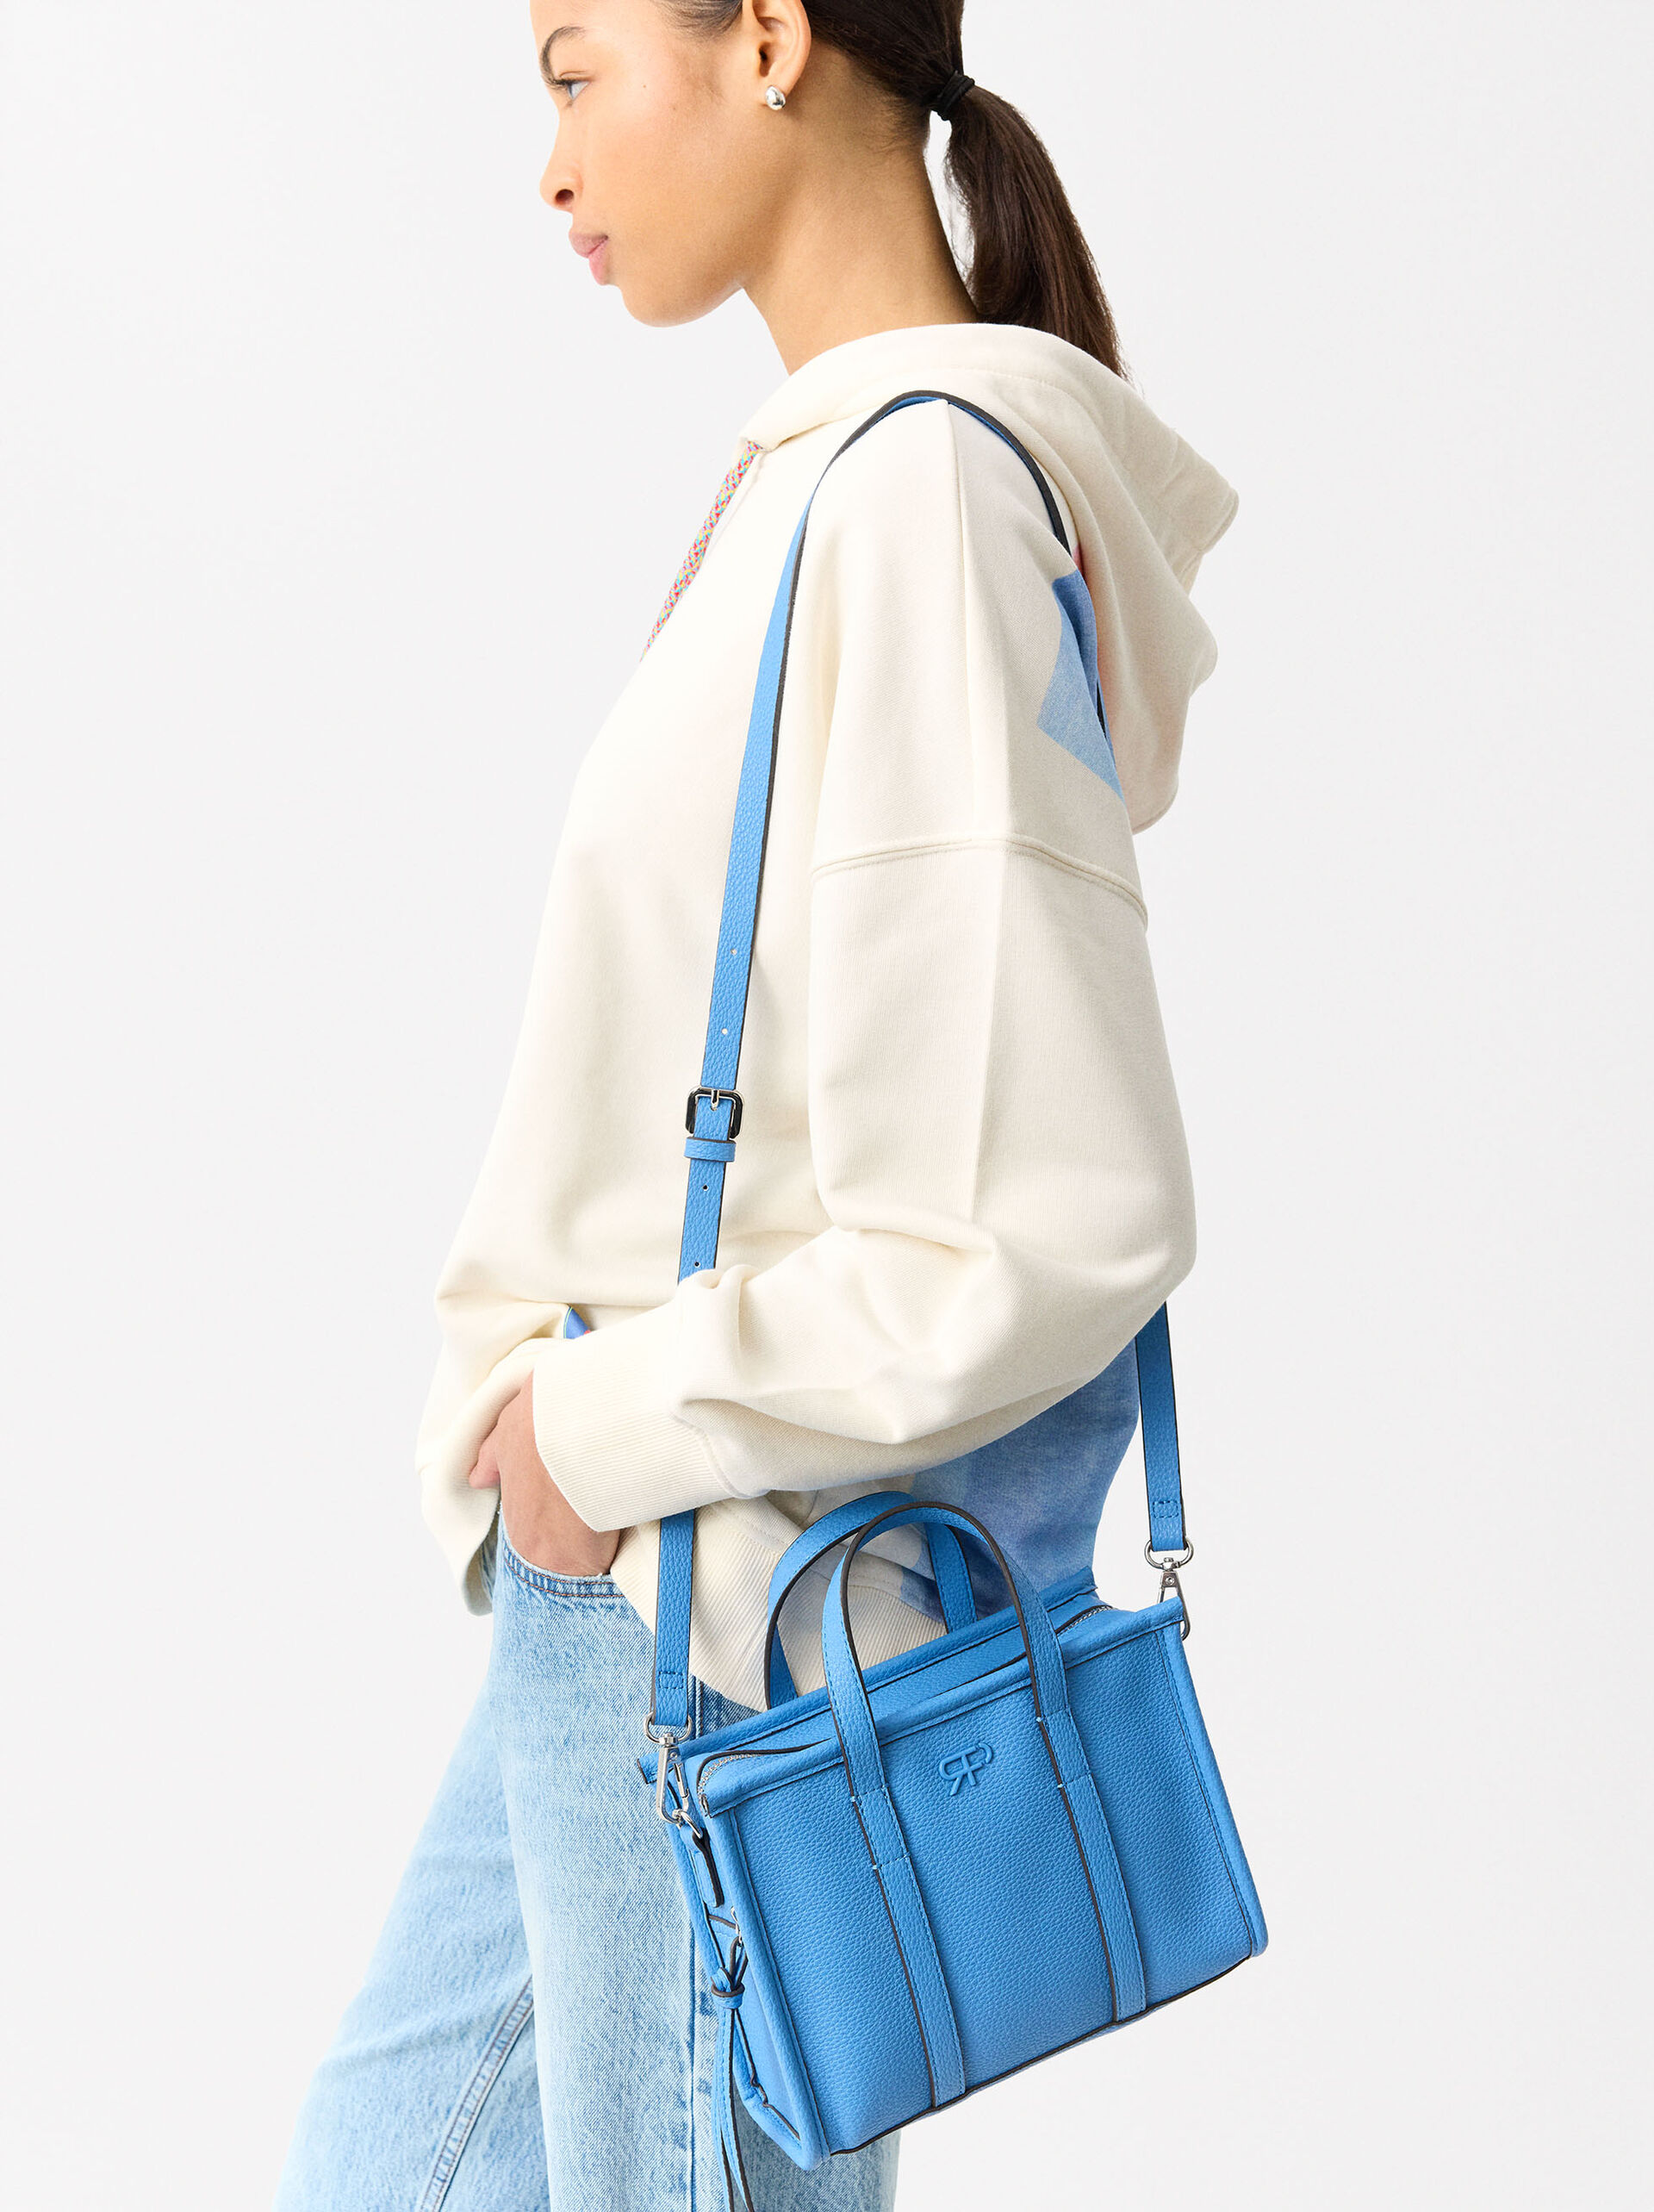 Torba Tote „Everyday” S image number 1.0